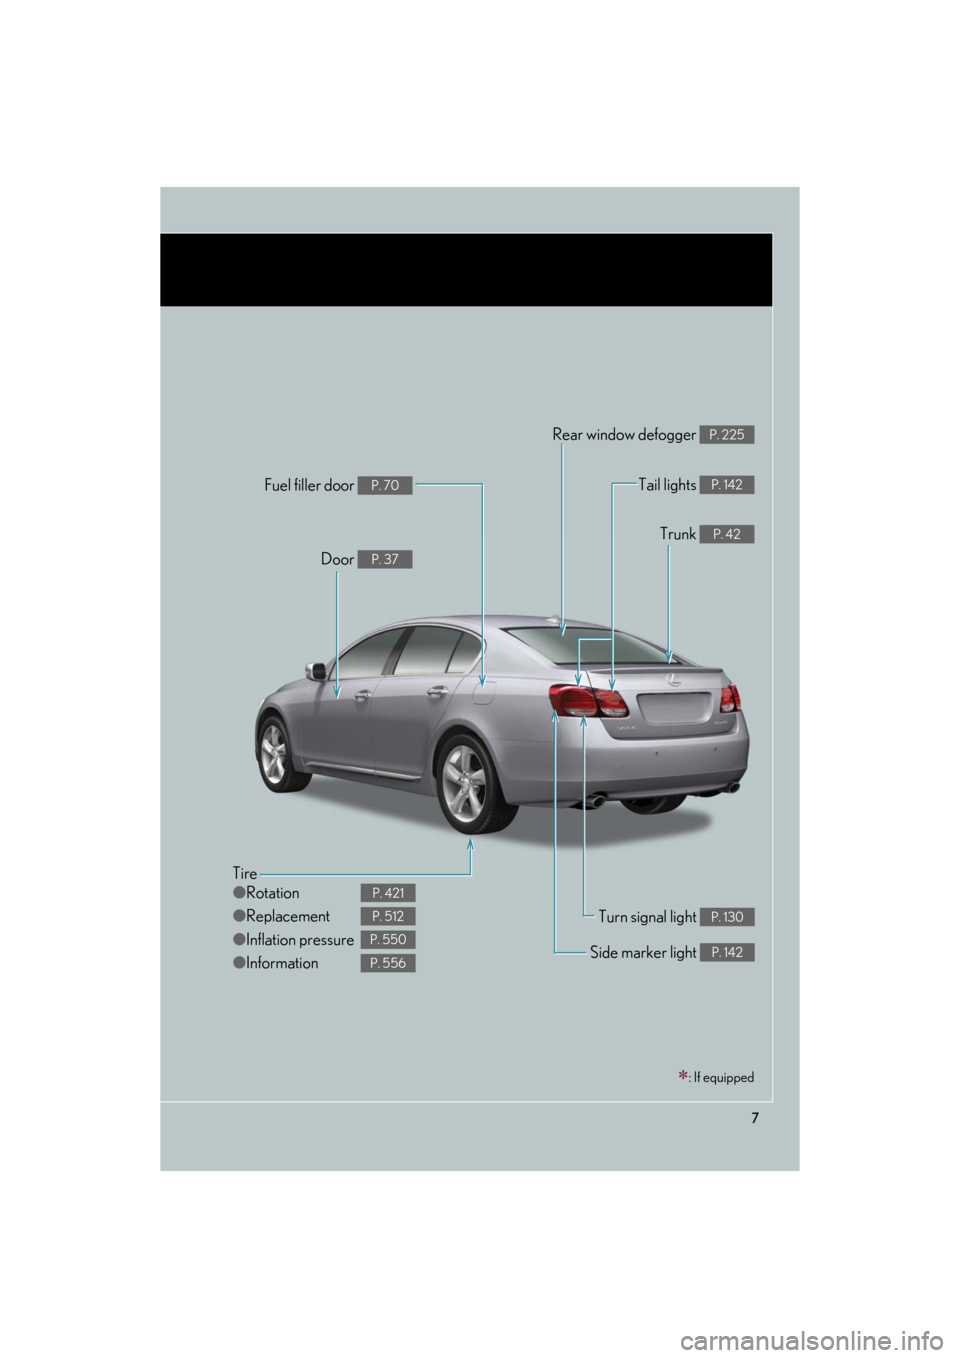 Lexus GS460 2008  Scheduled Maintenace Guide / LEXUS 2008 GS460/350 OWNERS MANUAL (OM30A87U) 7
GS_G_U
May 13, 2008 5:14 pm
Tire
●Rotation
● Replacement
● Inflation pressure
● Information
P. 421
P. 512
P. 550
P. 556
Tail lights P. 142
Side marker light P. 142
Trunk P. 42
Rear window de